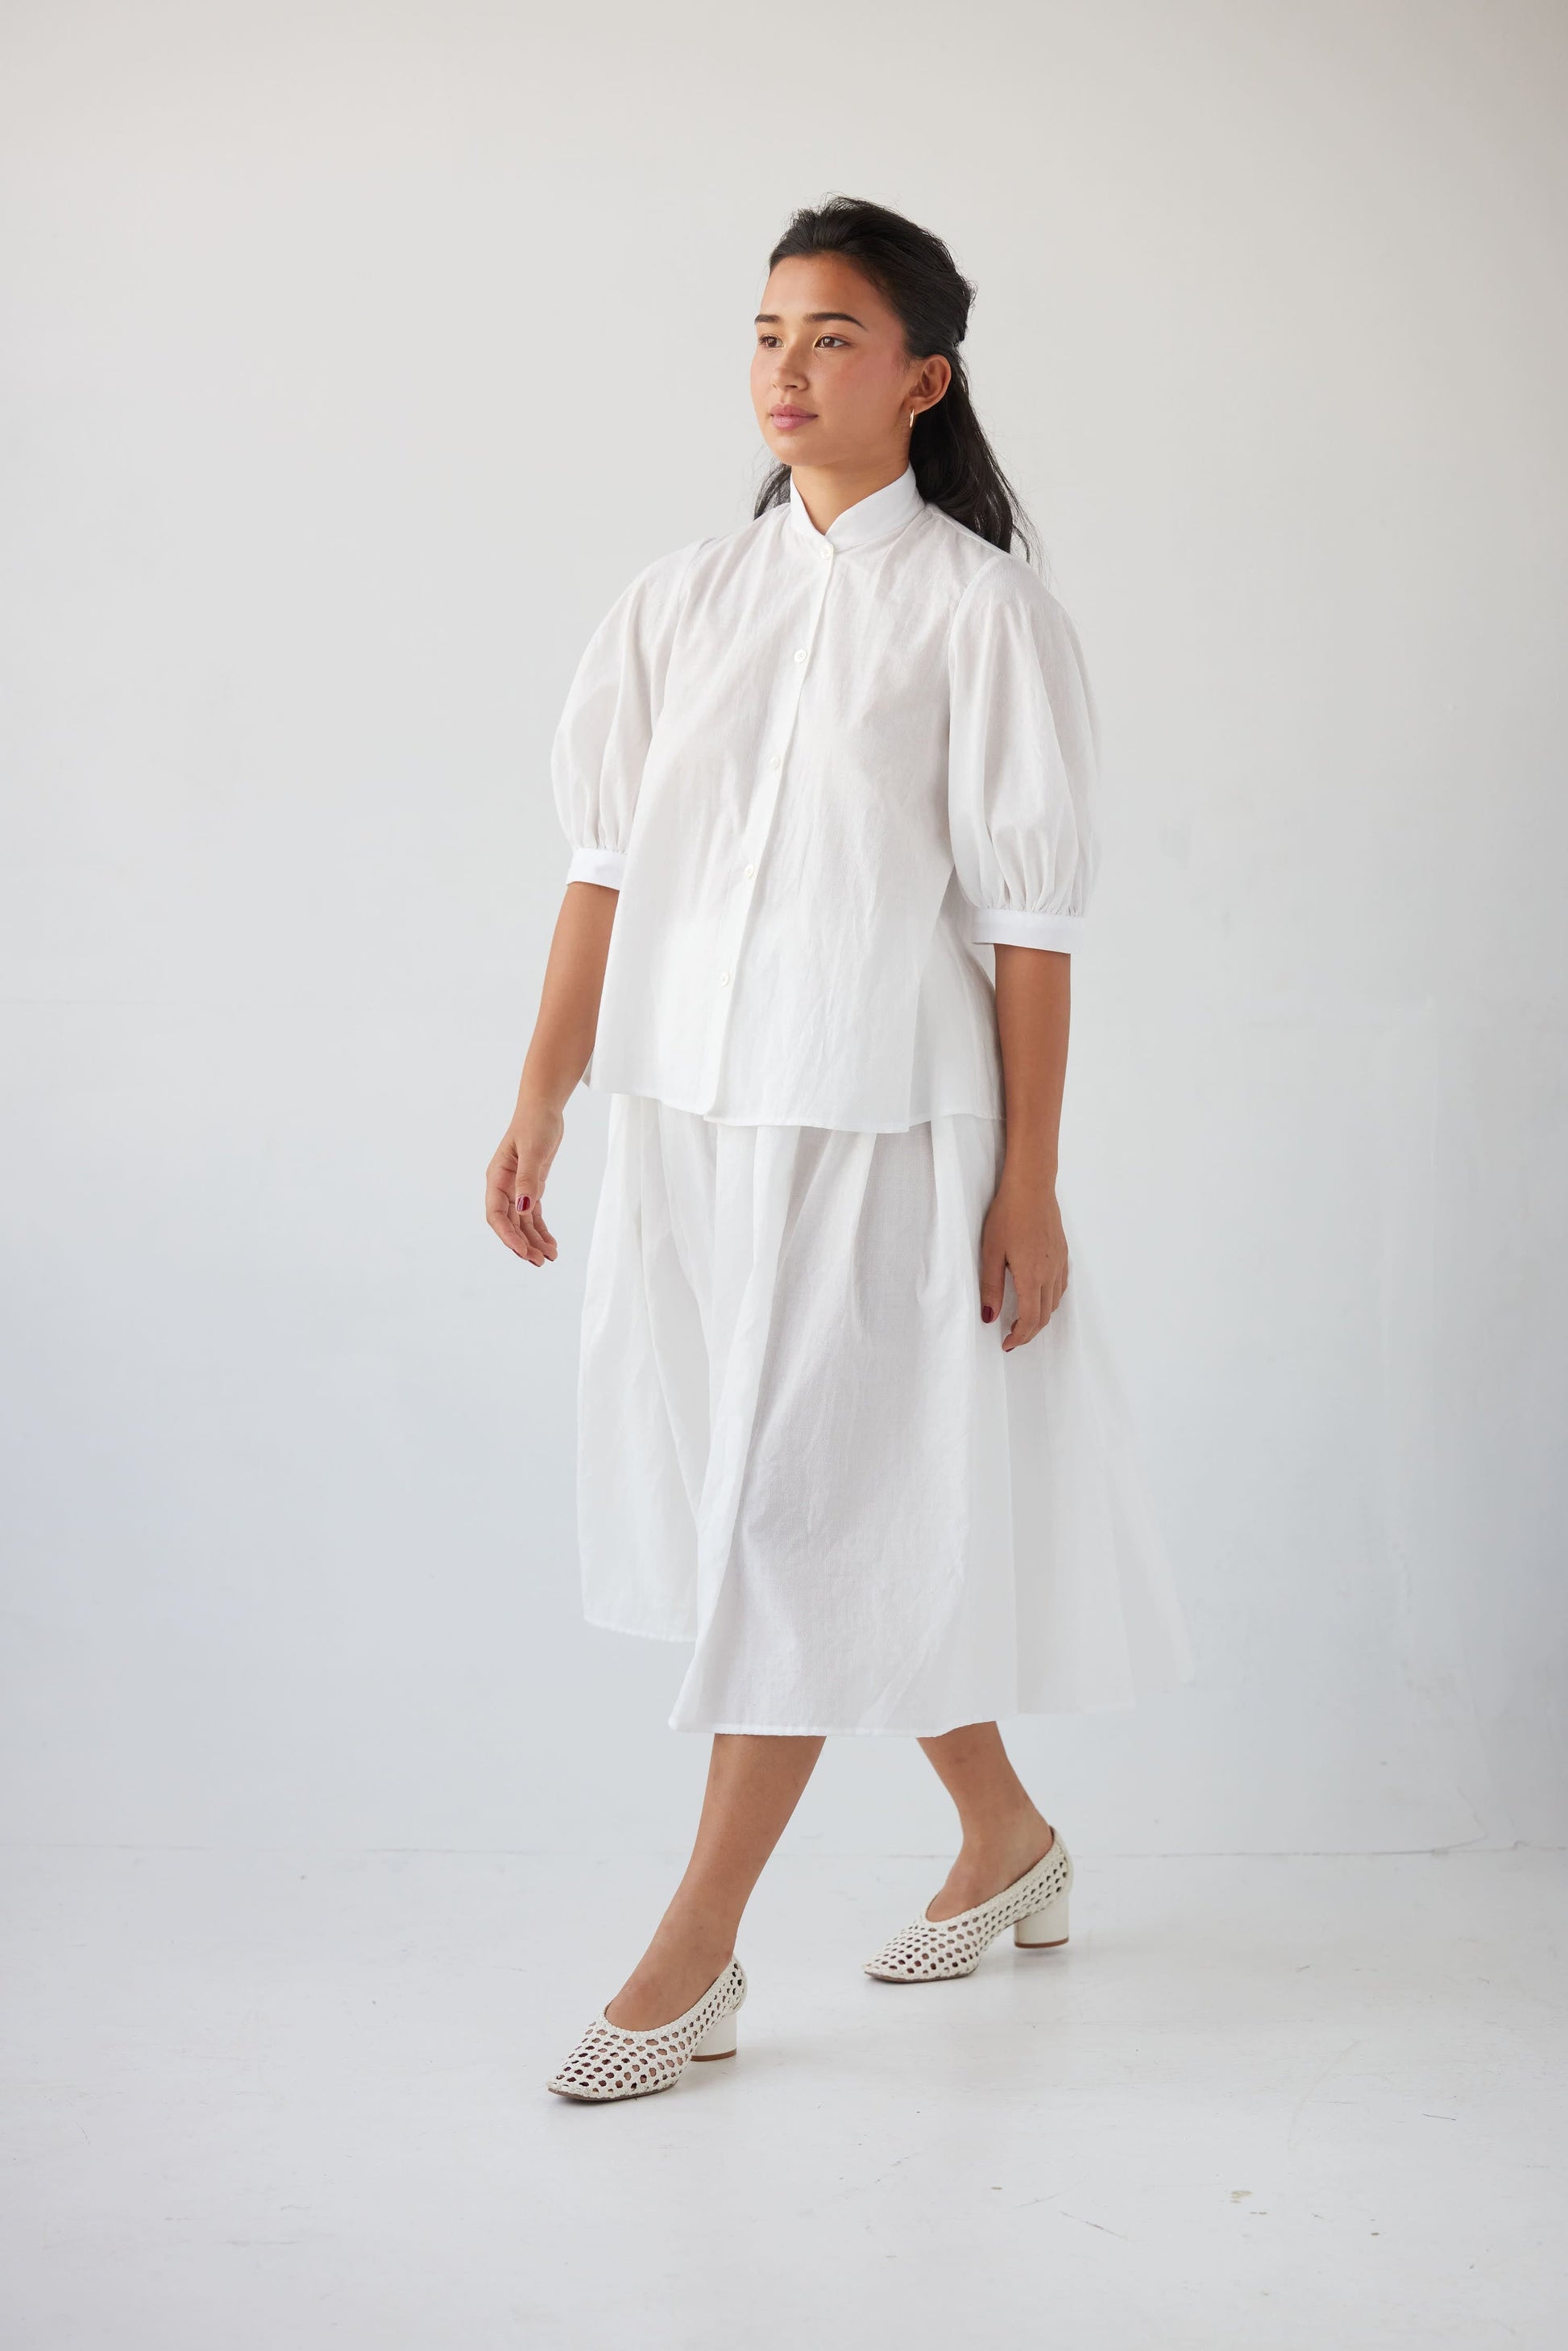 Erica Skirt in Summer Cotton Skirts CHRISTINE ALCALAY White Ticking Extra Small / Small 